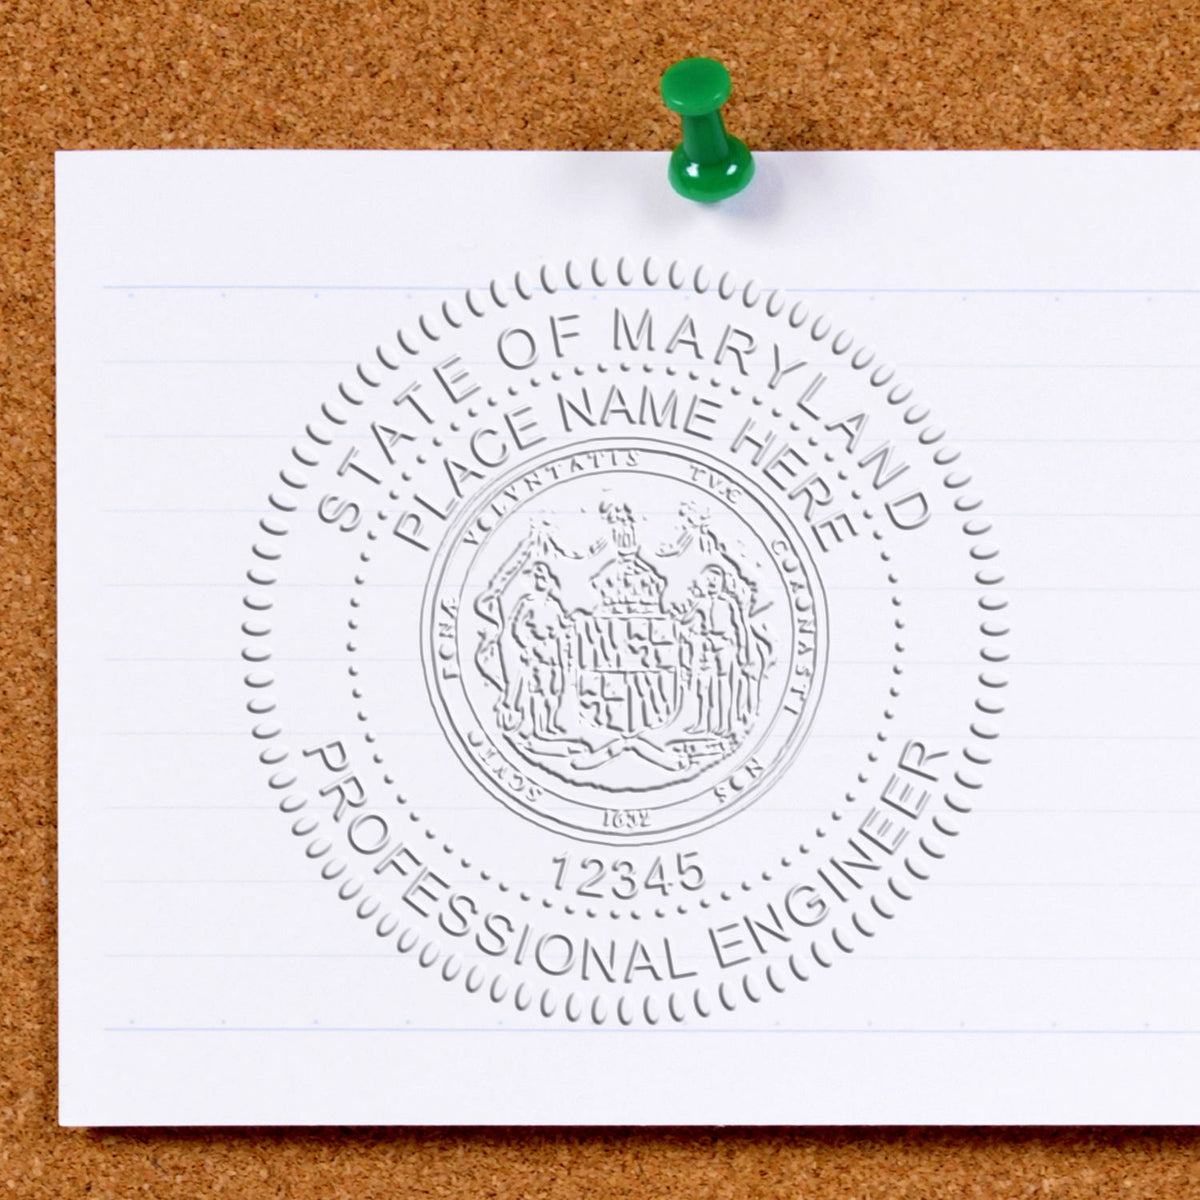 This paper is stamped with a sample imprint of the Soft Maryland Professional Engineer Seal, signifying its quality and reliability.